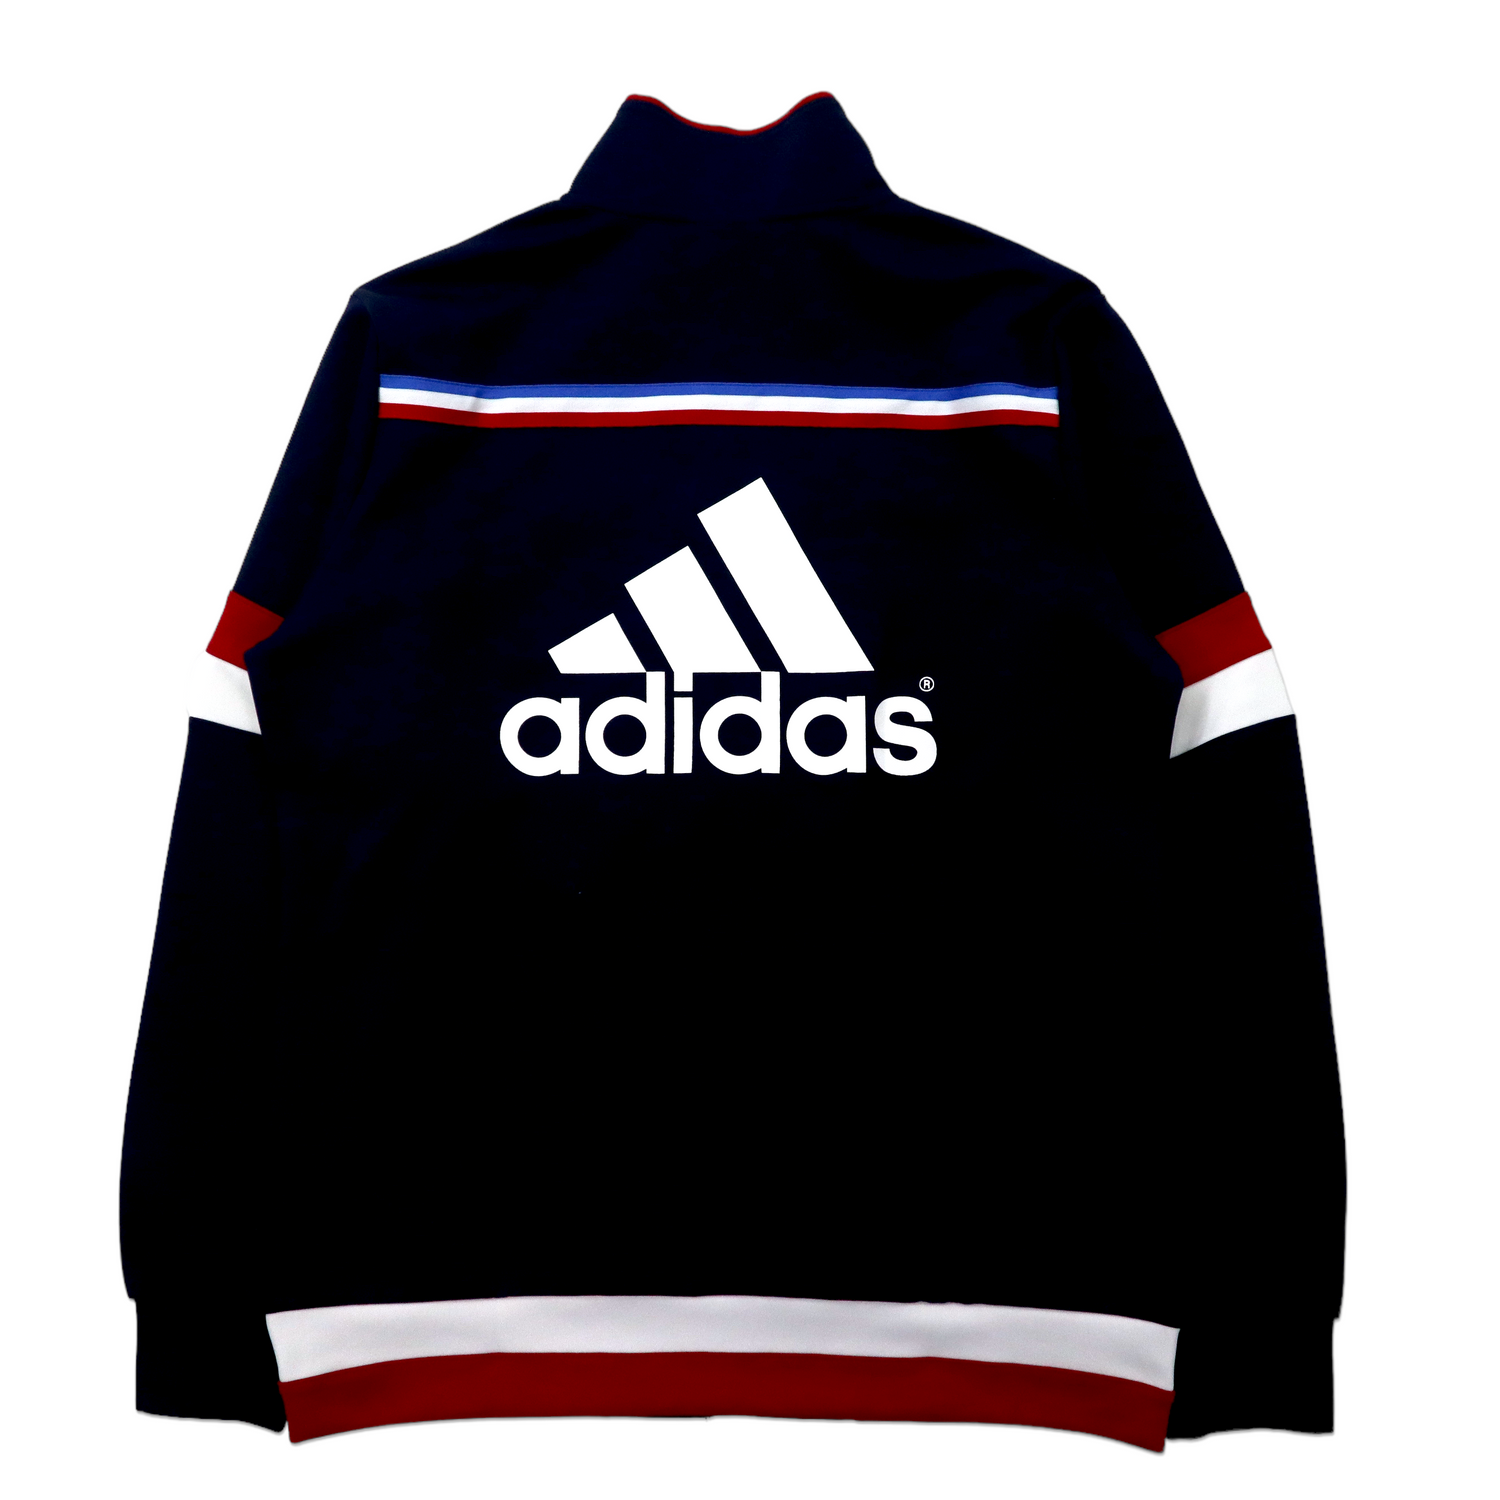 Adidas Track Jacket Jersey O Navy Polyester 3 STRIPED Stricolor 